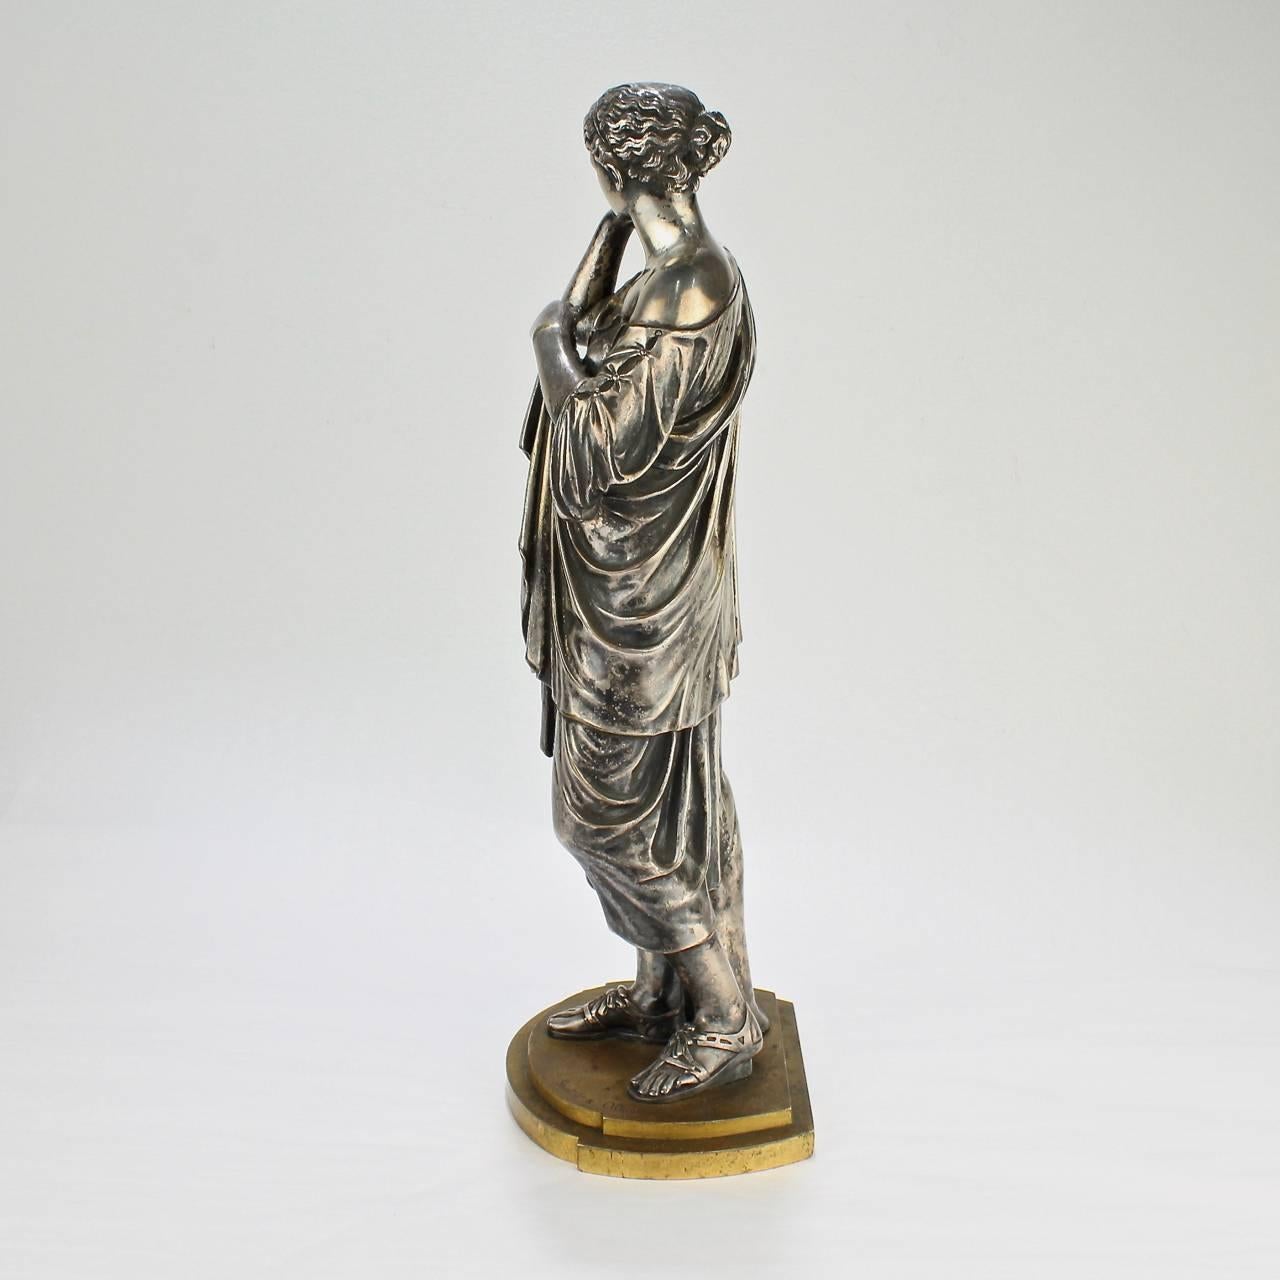 A finely scaled model of the Diane de Gabies published by Gautier and Albinet.

With a wonderful distressed silvered surface throughout. 

The Diane de Gabies is modeled after the ancient Greek sculpture found in the Villa Borghese and